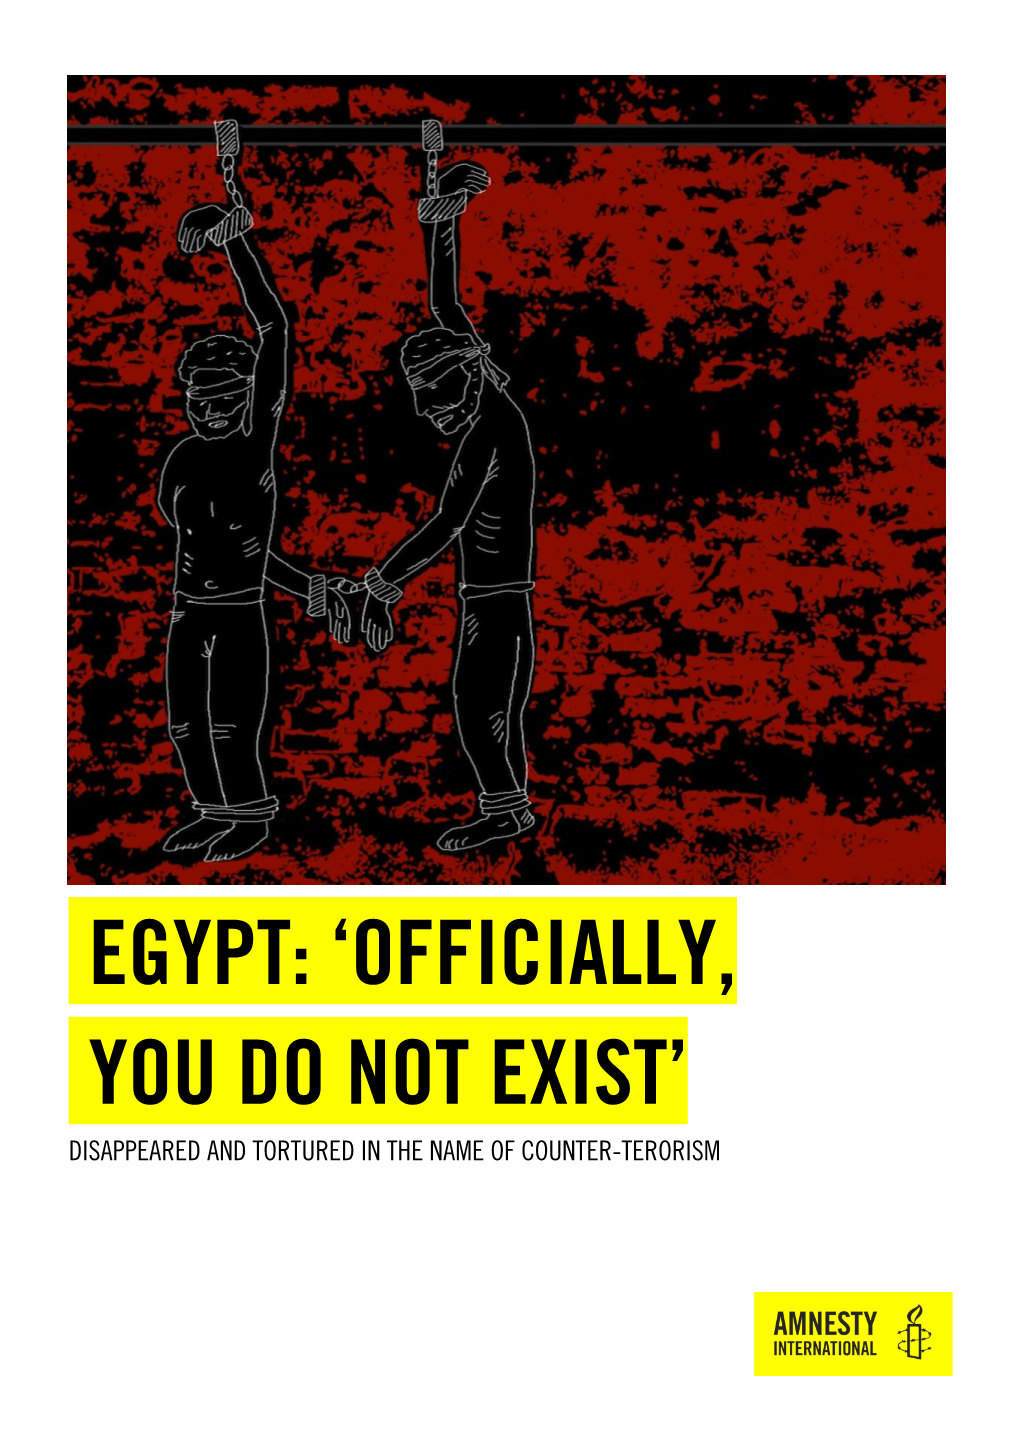 Egypt: 'Officially, You Do Not Exist'